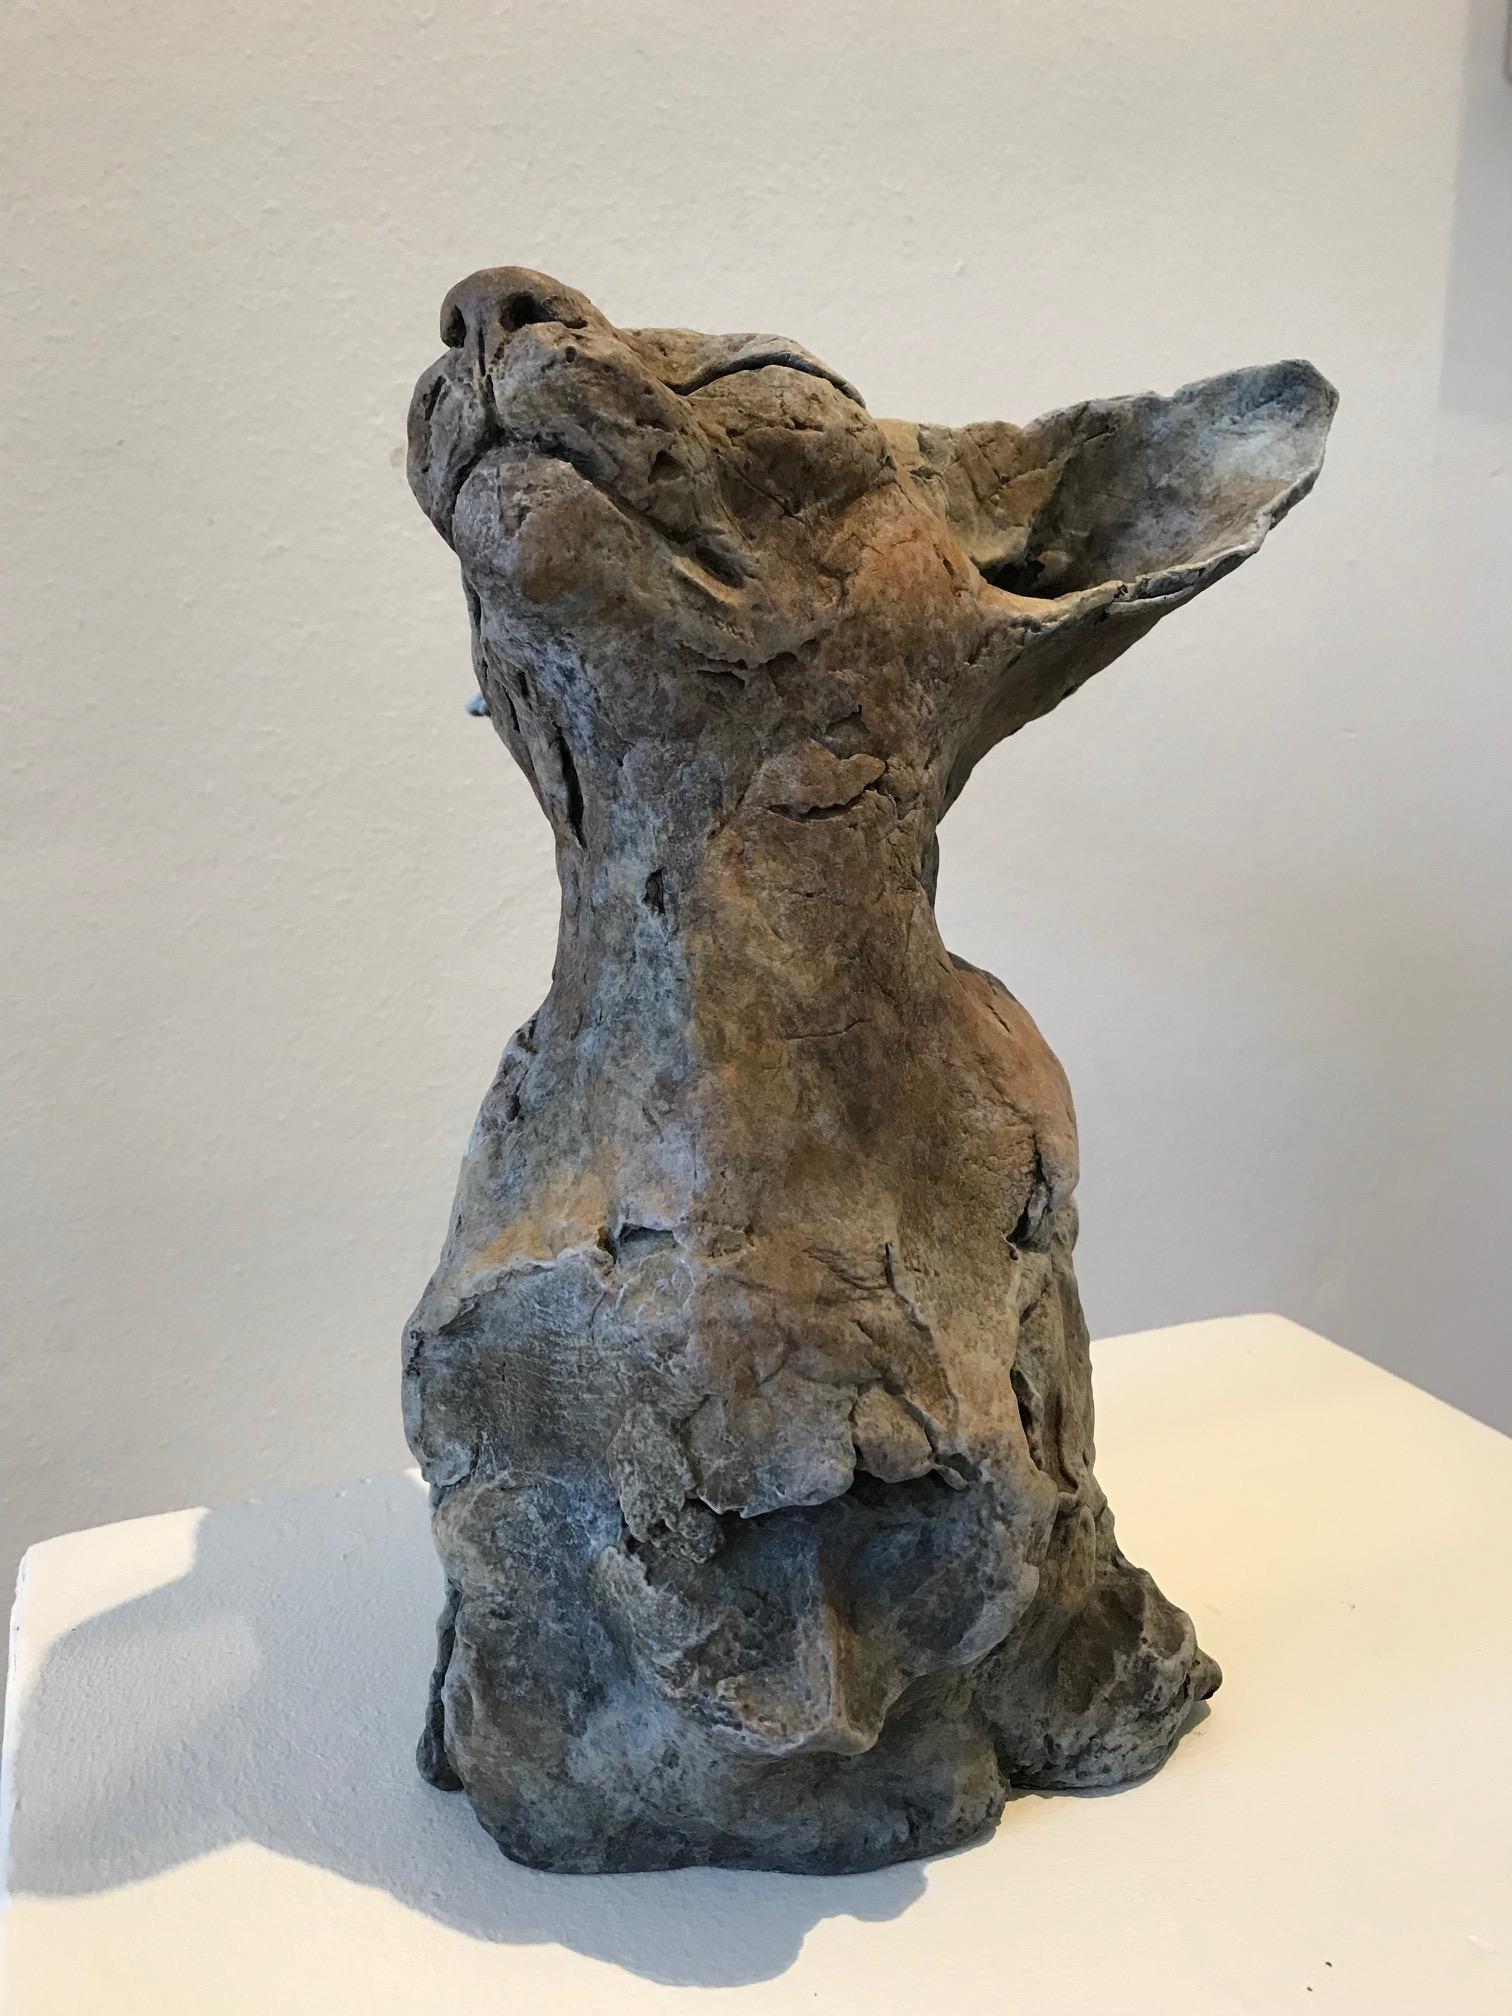 Nichola Theakston (1967) has established herself as one of the UK’s foremost contemporary sculptors working within the animal genre. 

With the ''Bastet Study 3'' Nichola shows how exquisite she can capture the feelings and expressions in an animal.